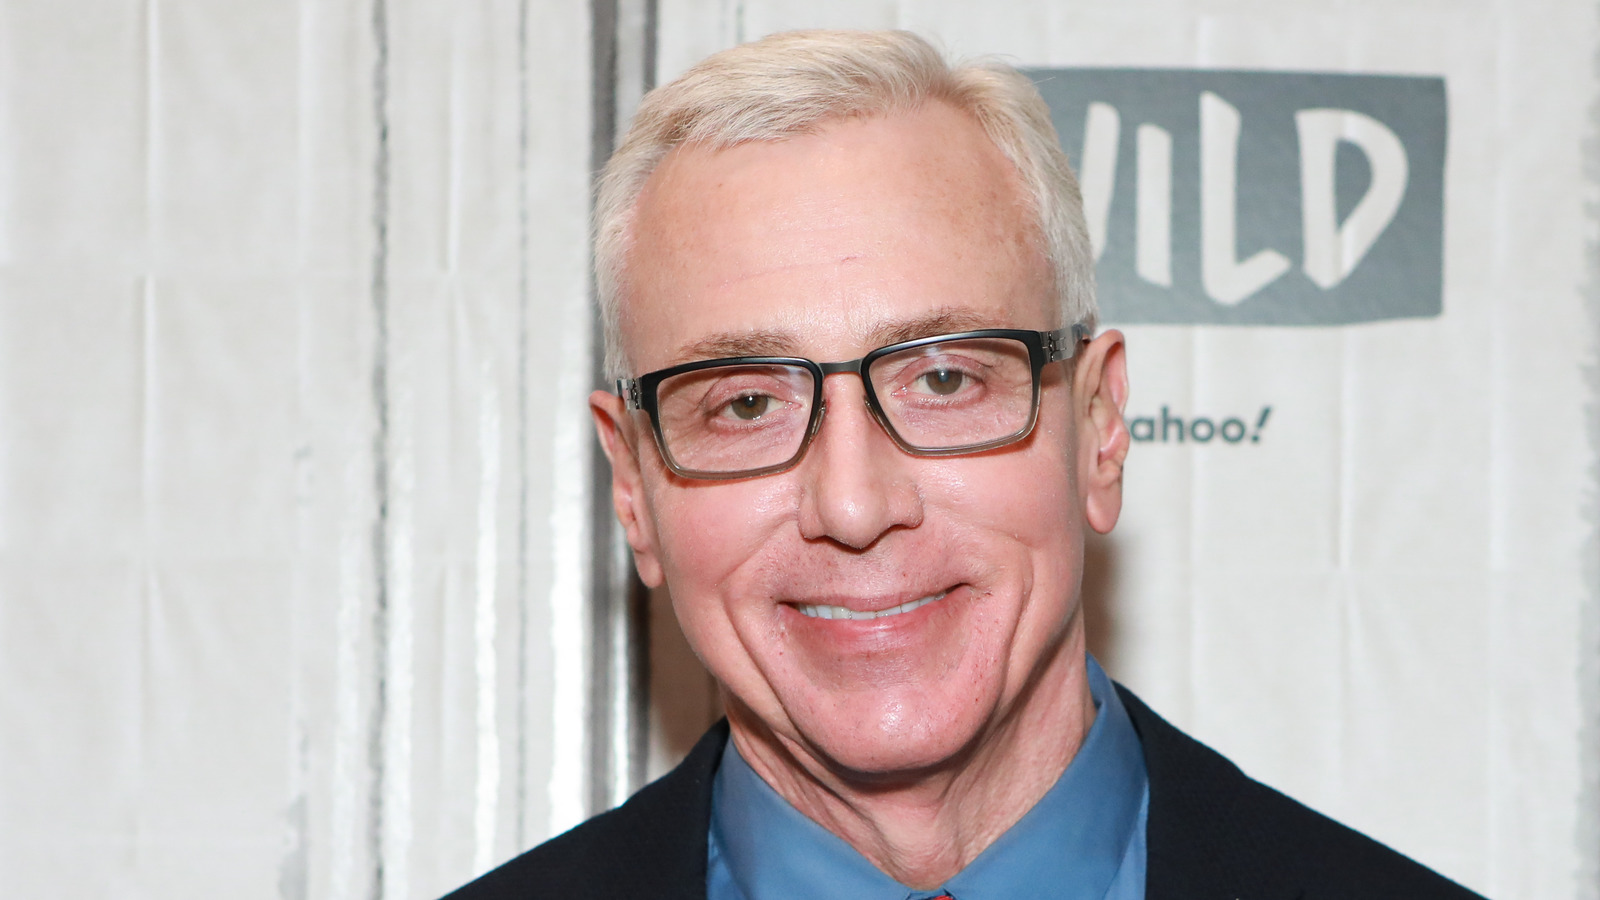 The Truth About Dr. Drew's COVID-19 Diagnosis